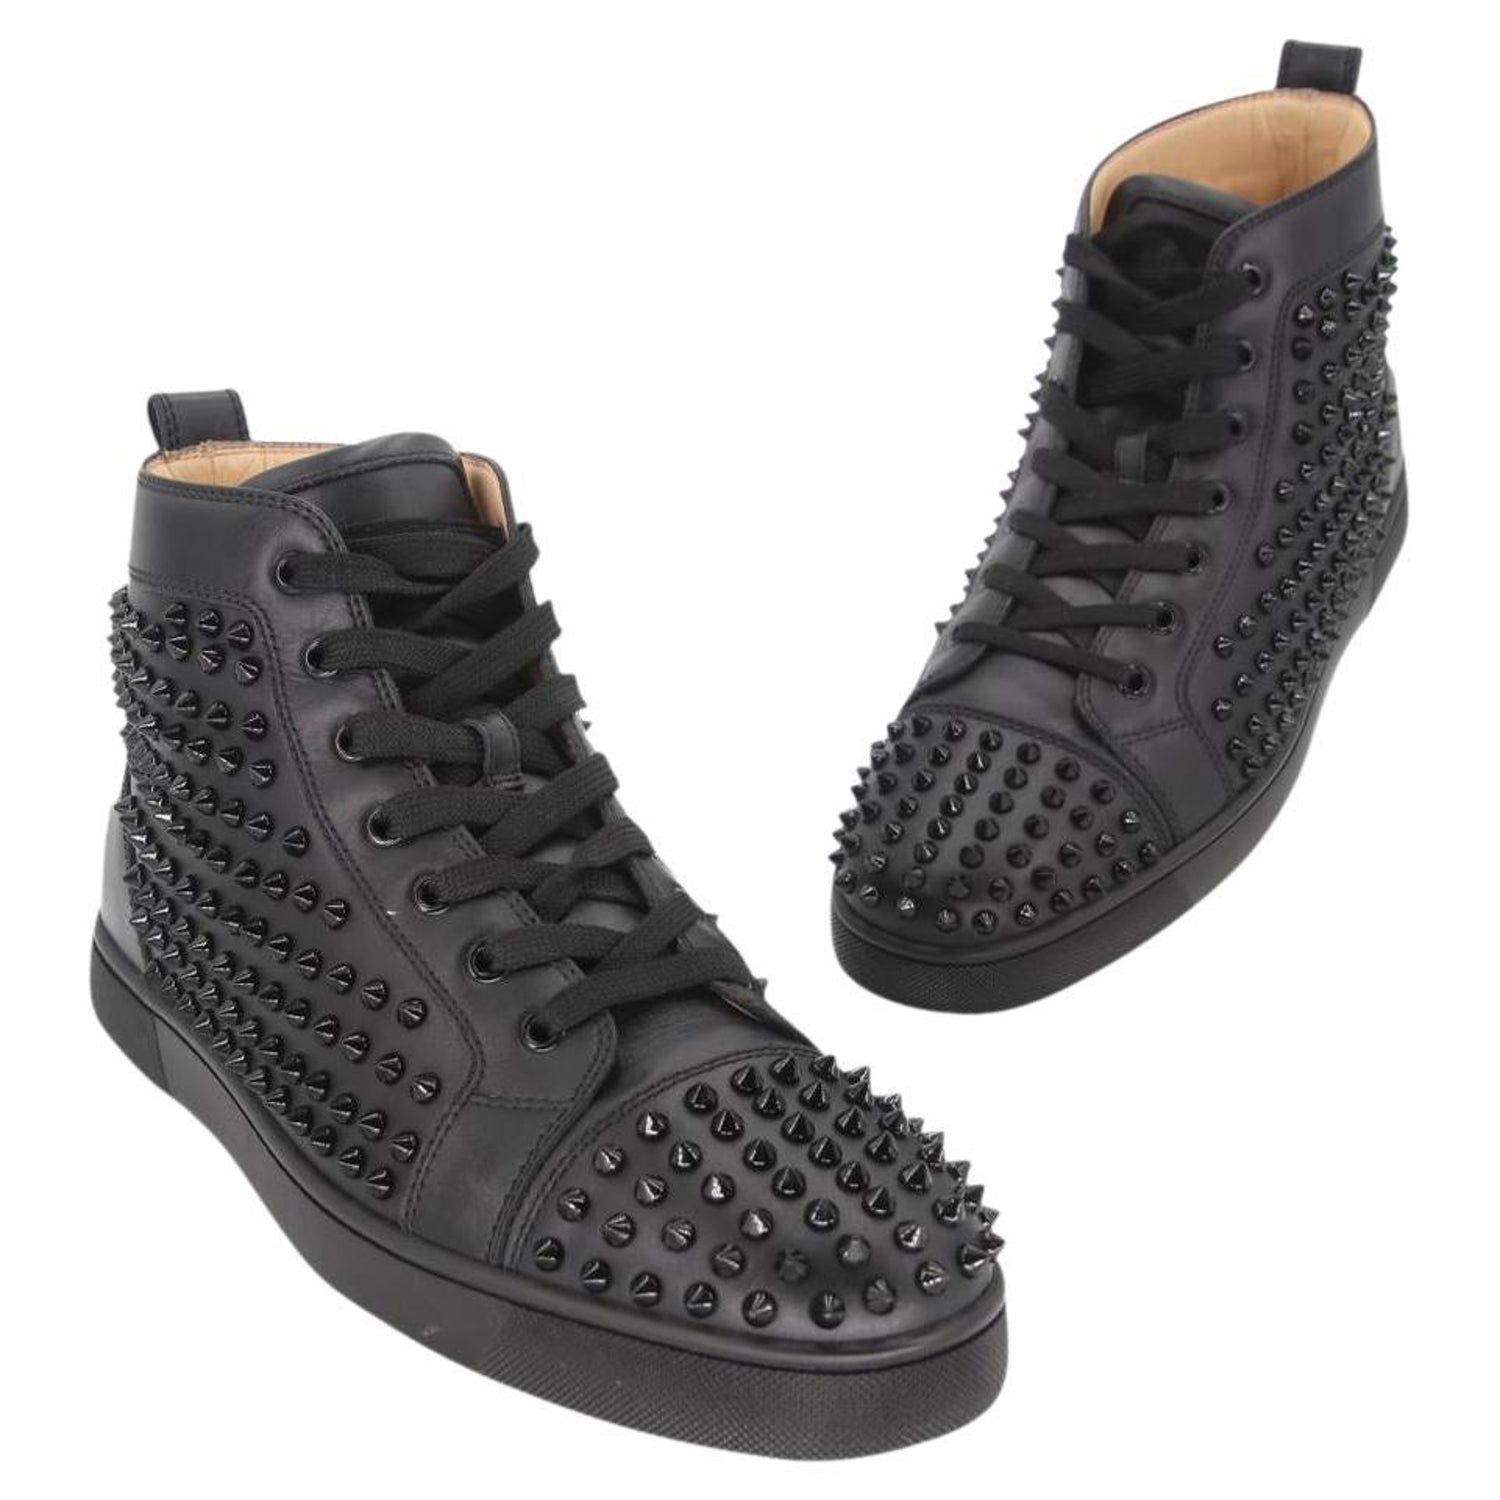 red bottoms shoes for men  Christian louboutin sneakers, Red bottom shoes, Sneakers  men